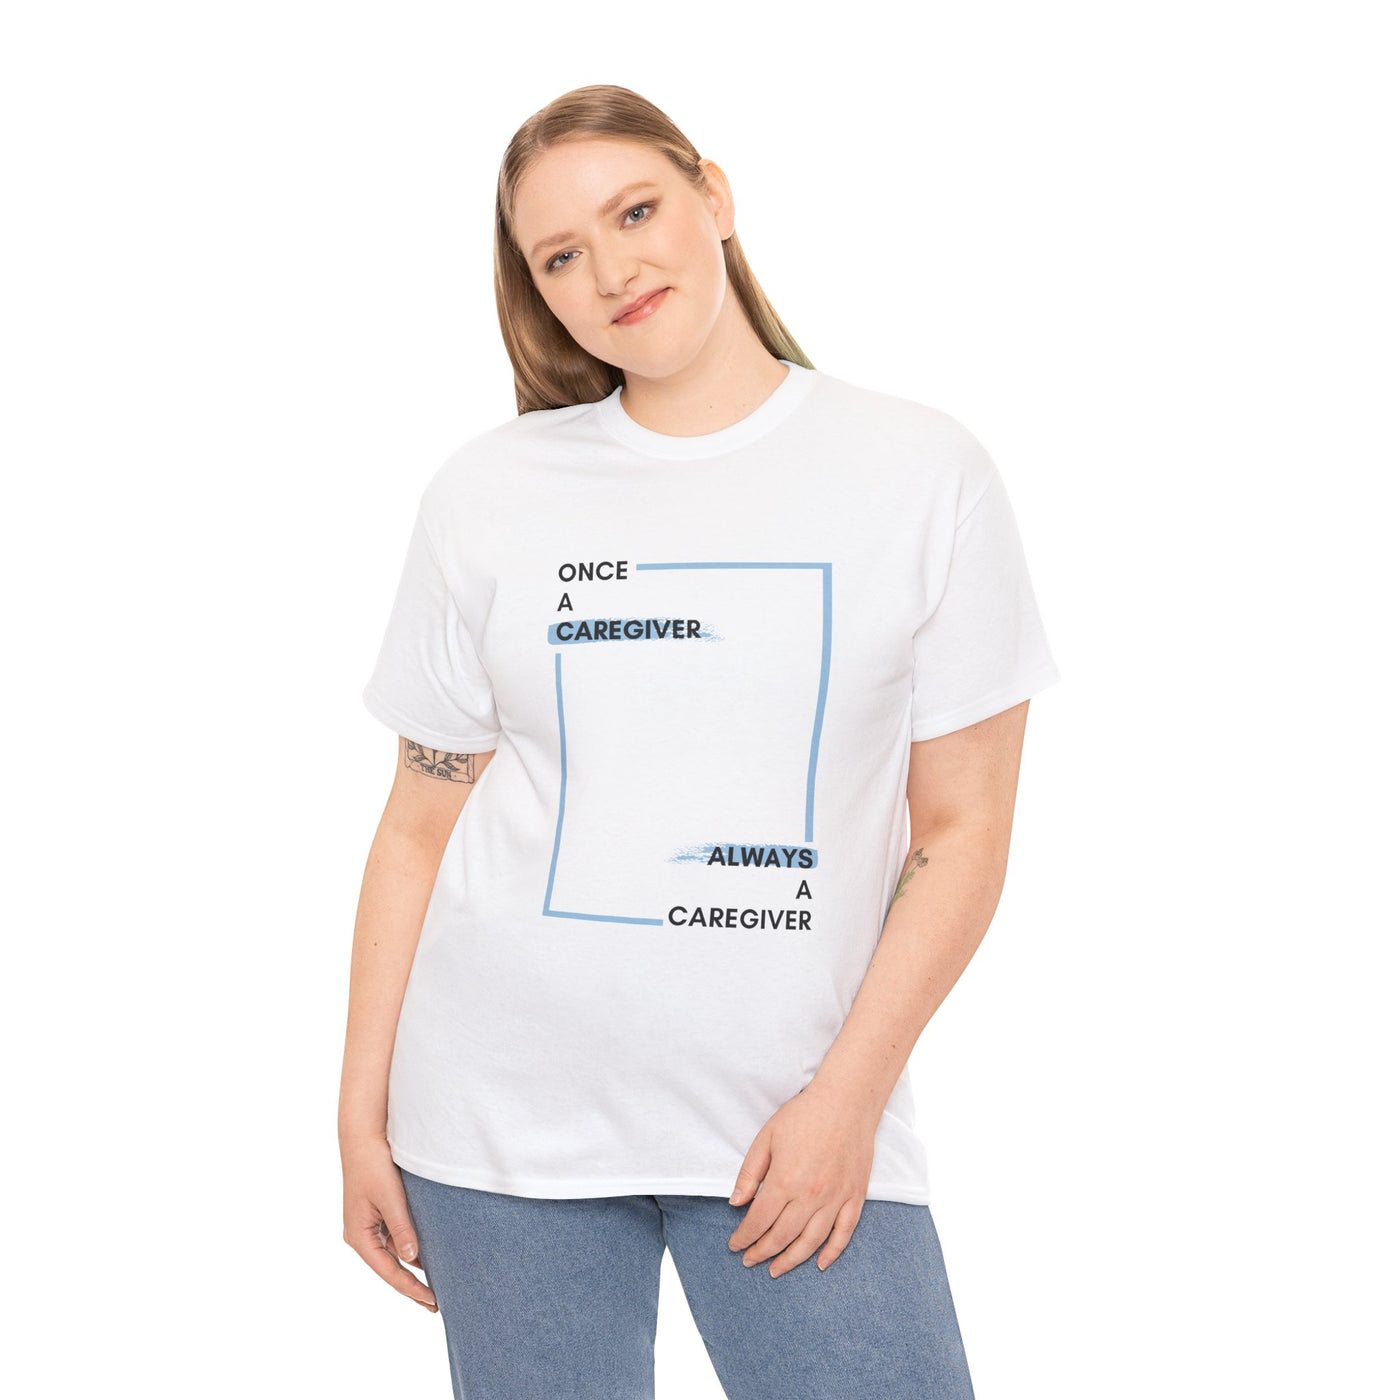 "Once a Caregiver, Always a Caregiver" Cotton Tee